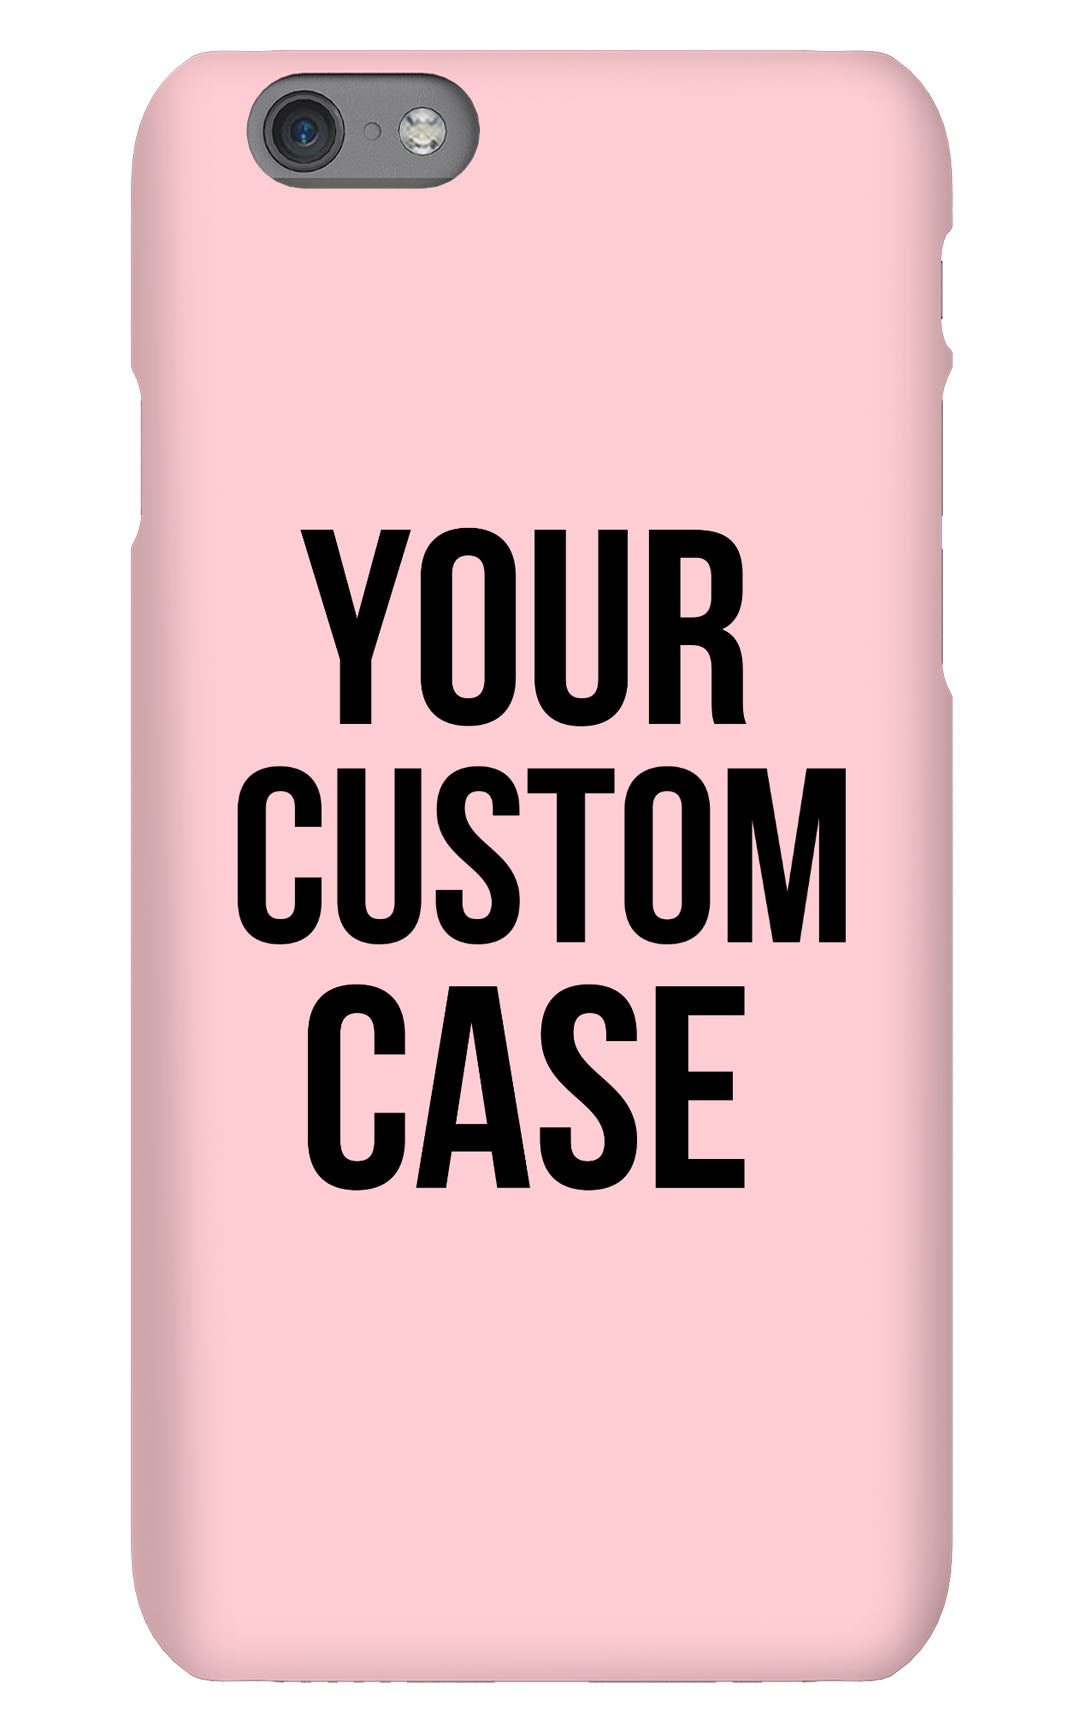 Custom iPhone 6 / 6S Slim Case - Your Custom Design in Cart will be Shipped - Pixly Case